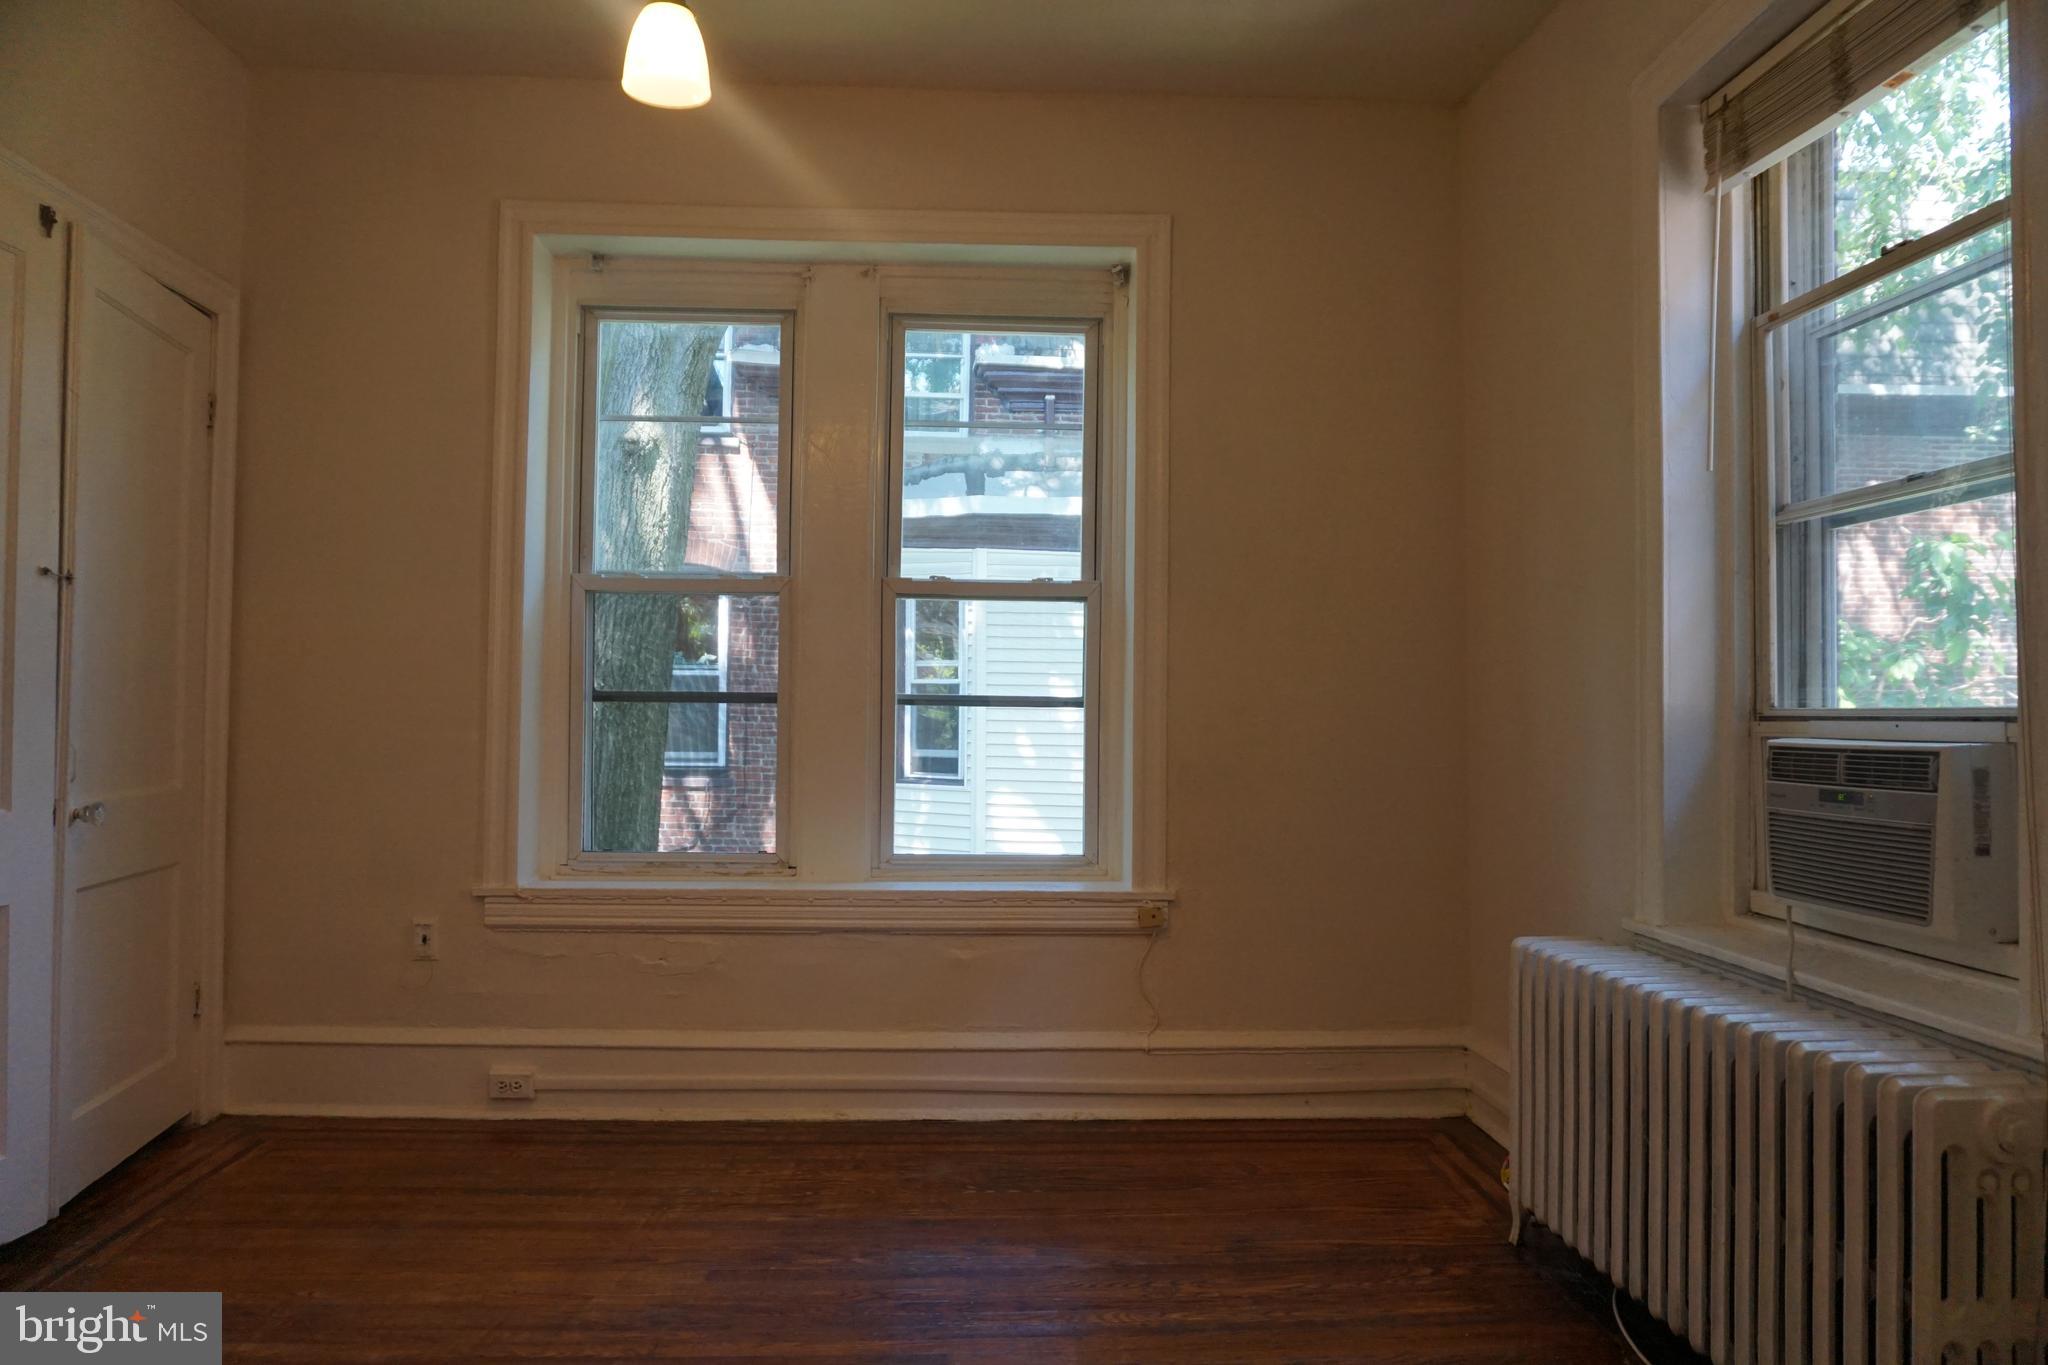 a view of a livingroom with wooden floor and windows